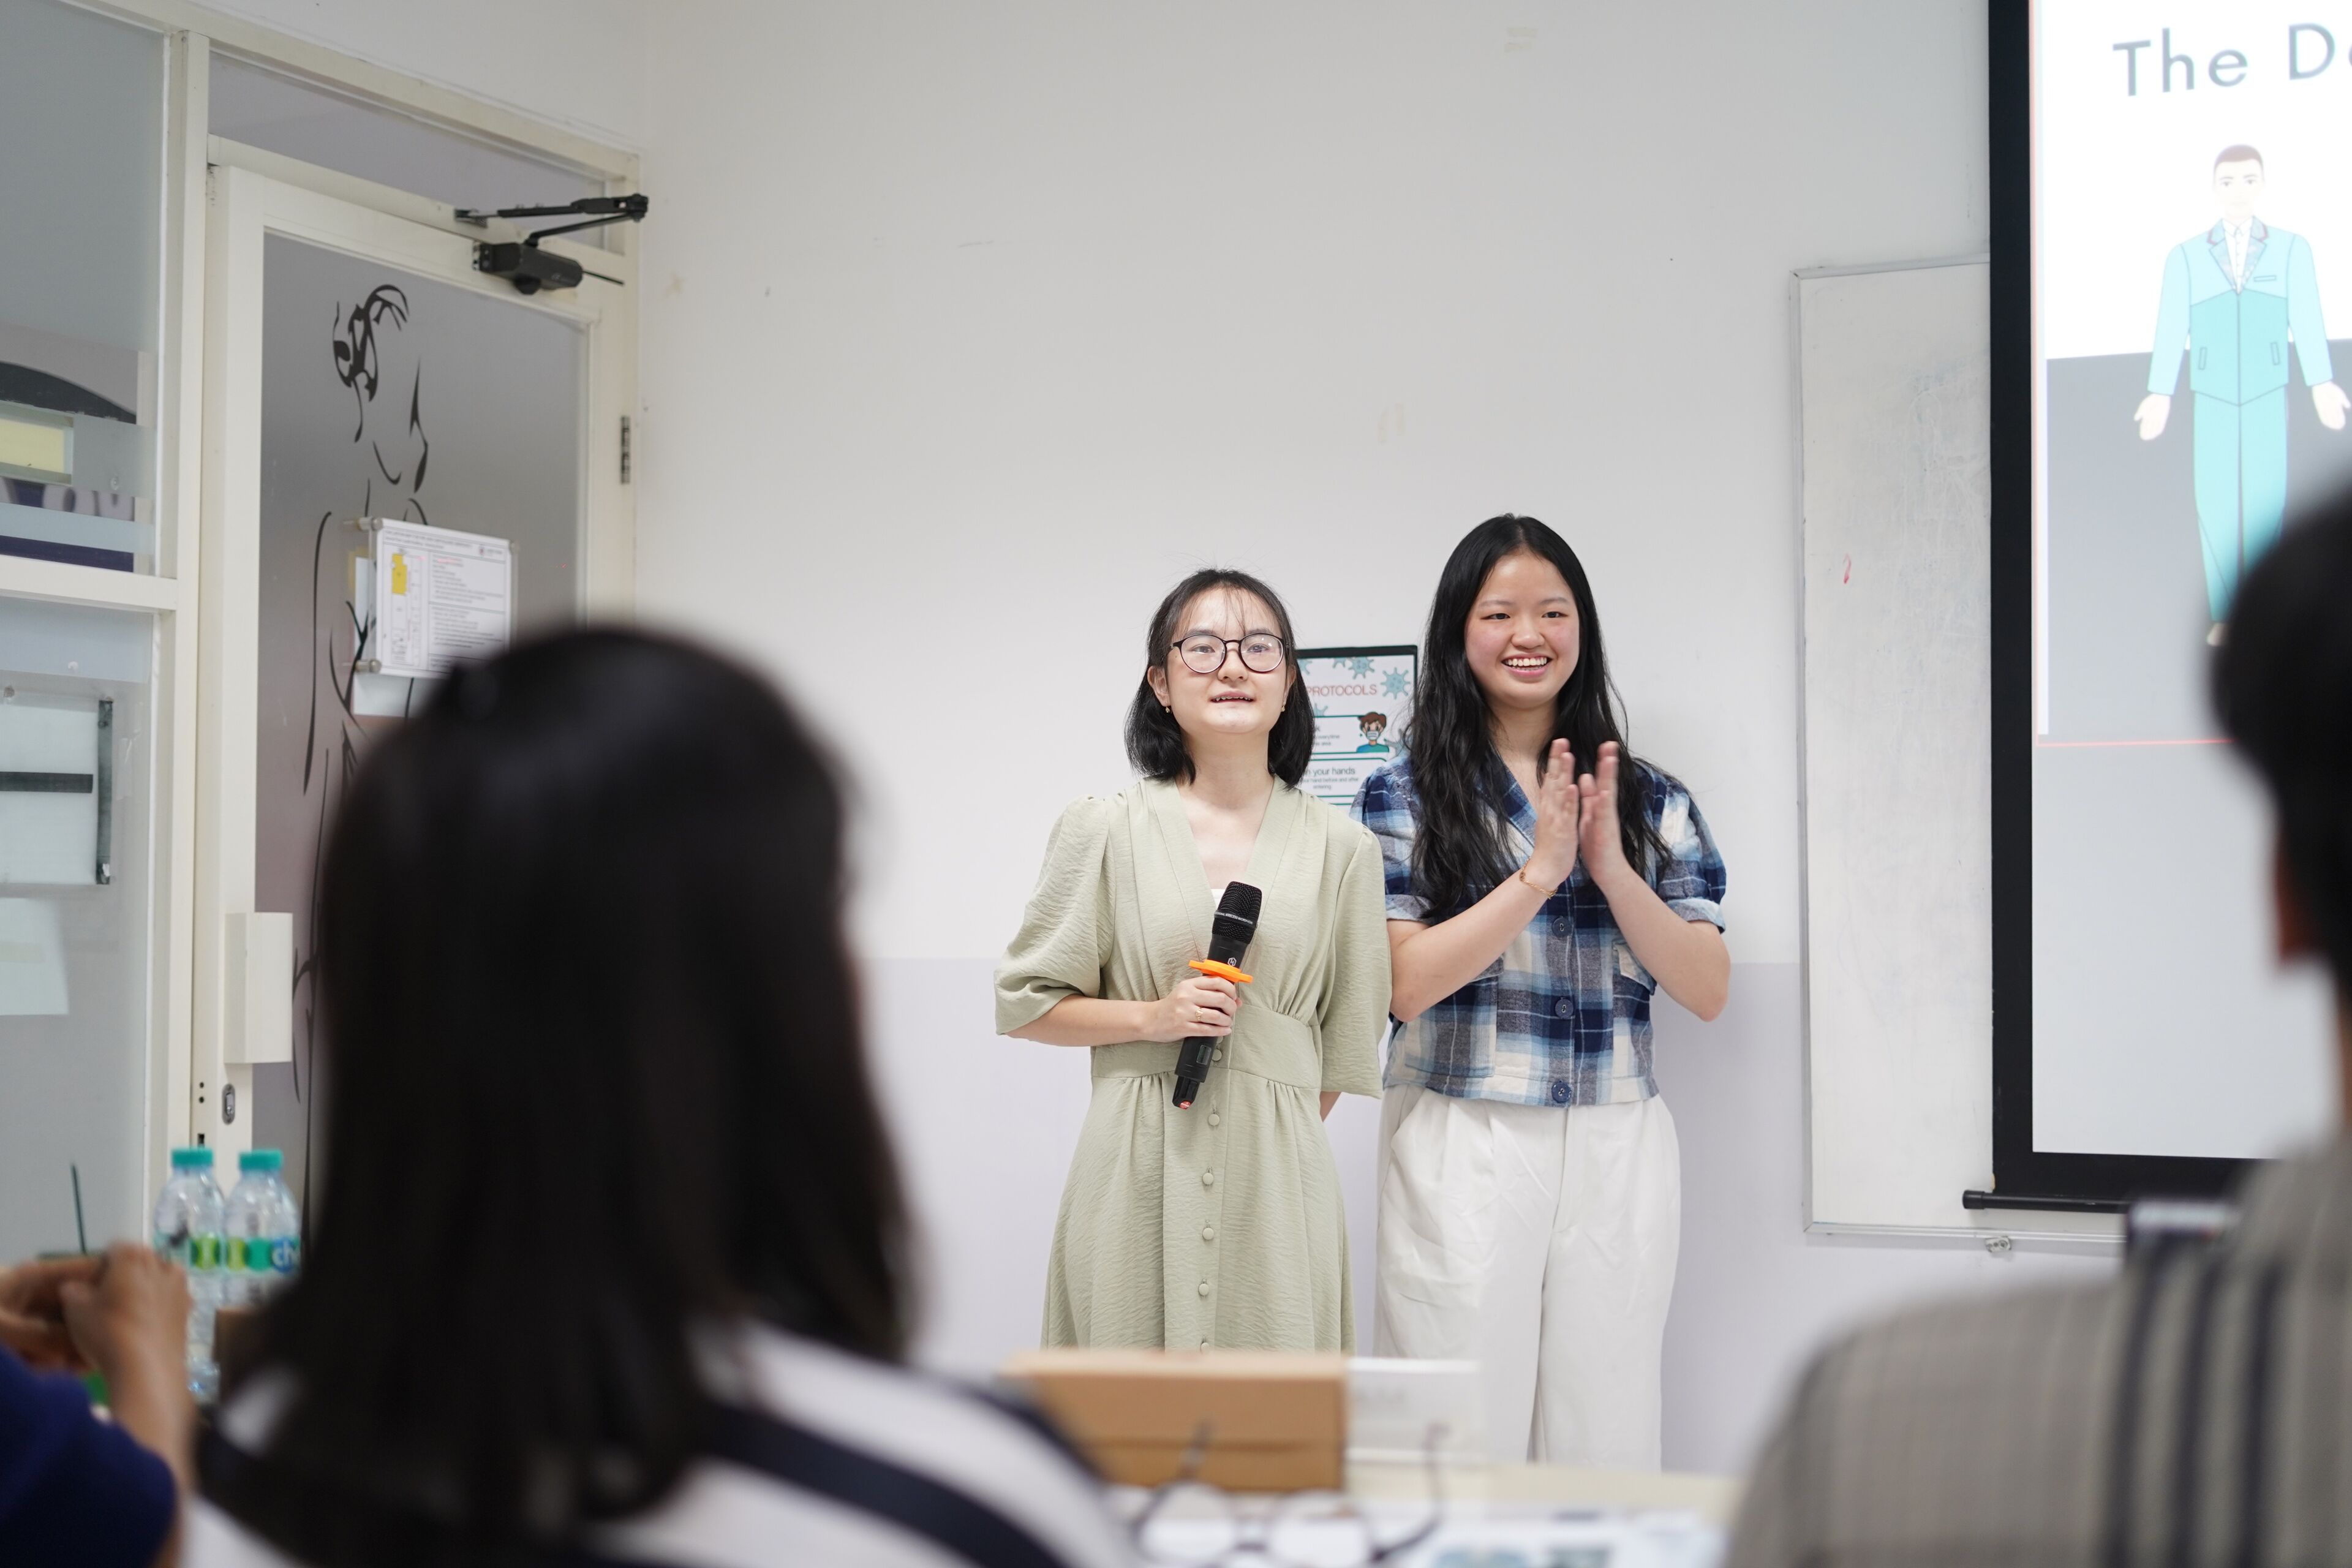 Two students happily present their project in a classroom, one holding a microphone, as the other applauds next to a projected display.